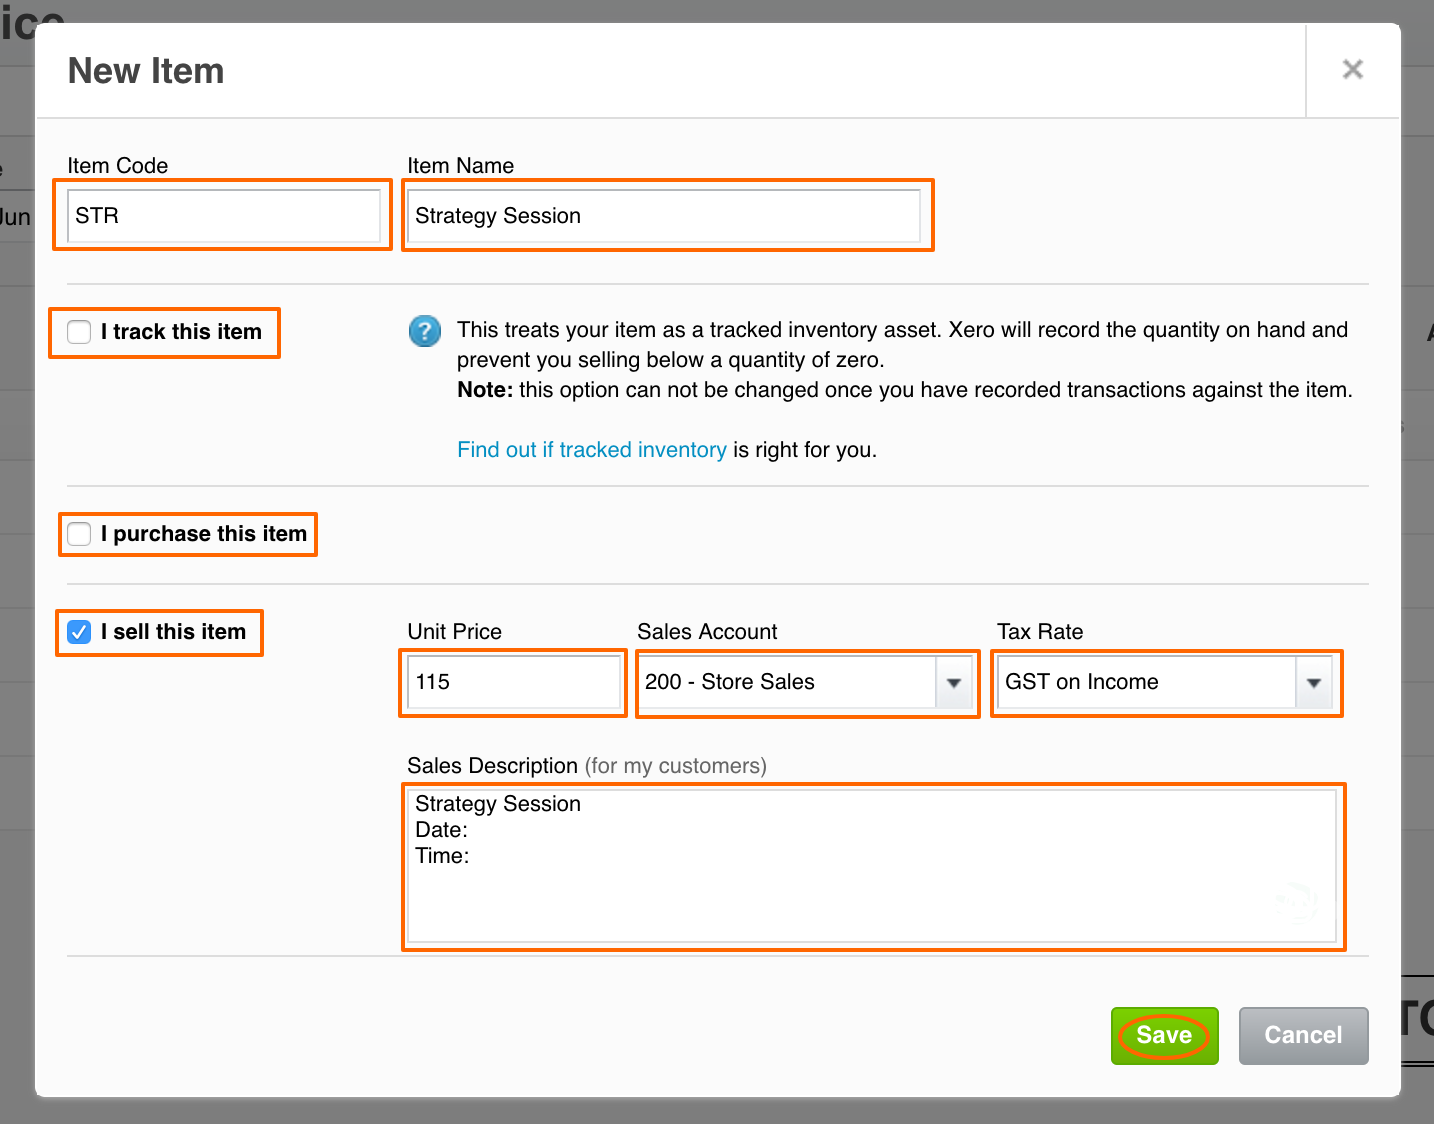 Add item details for fast invoicing in Xero